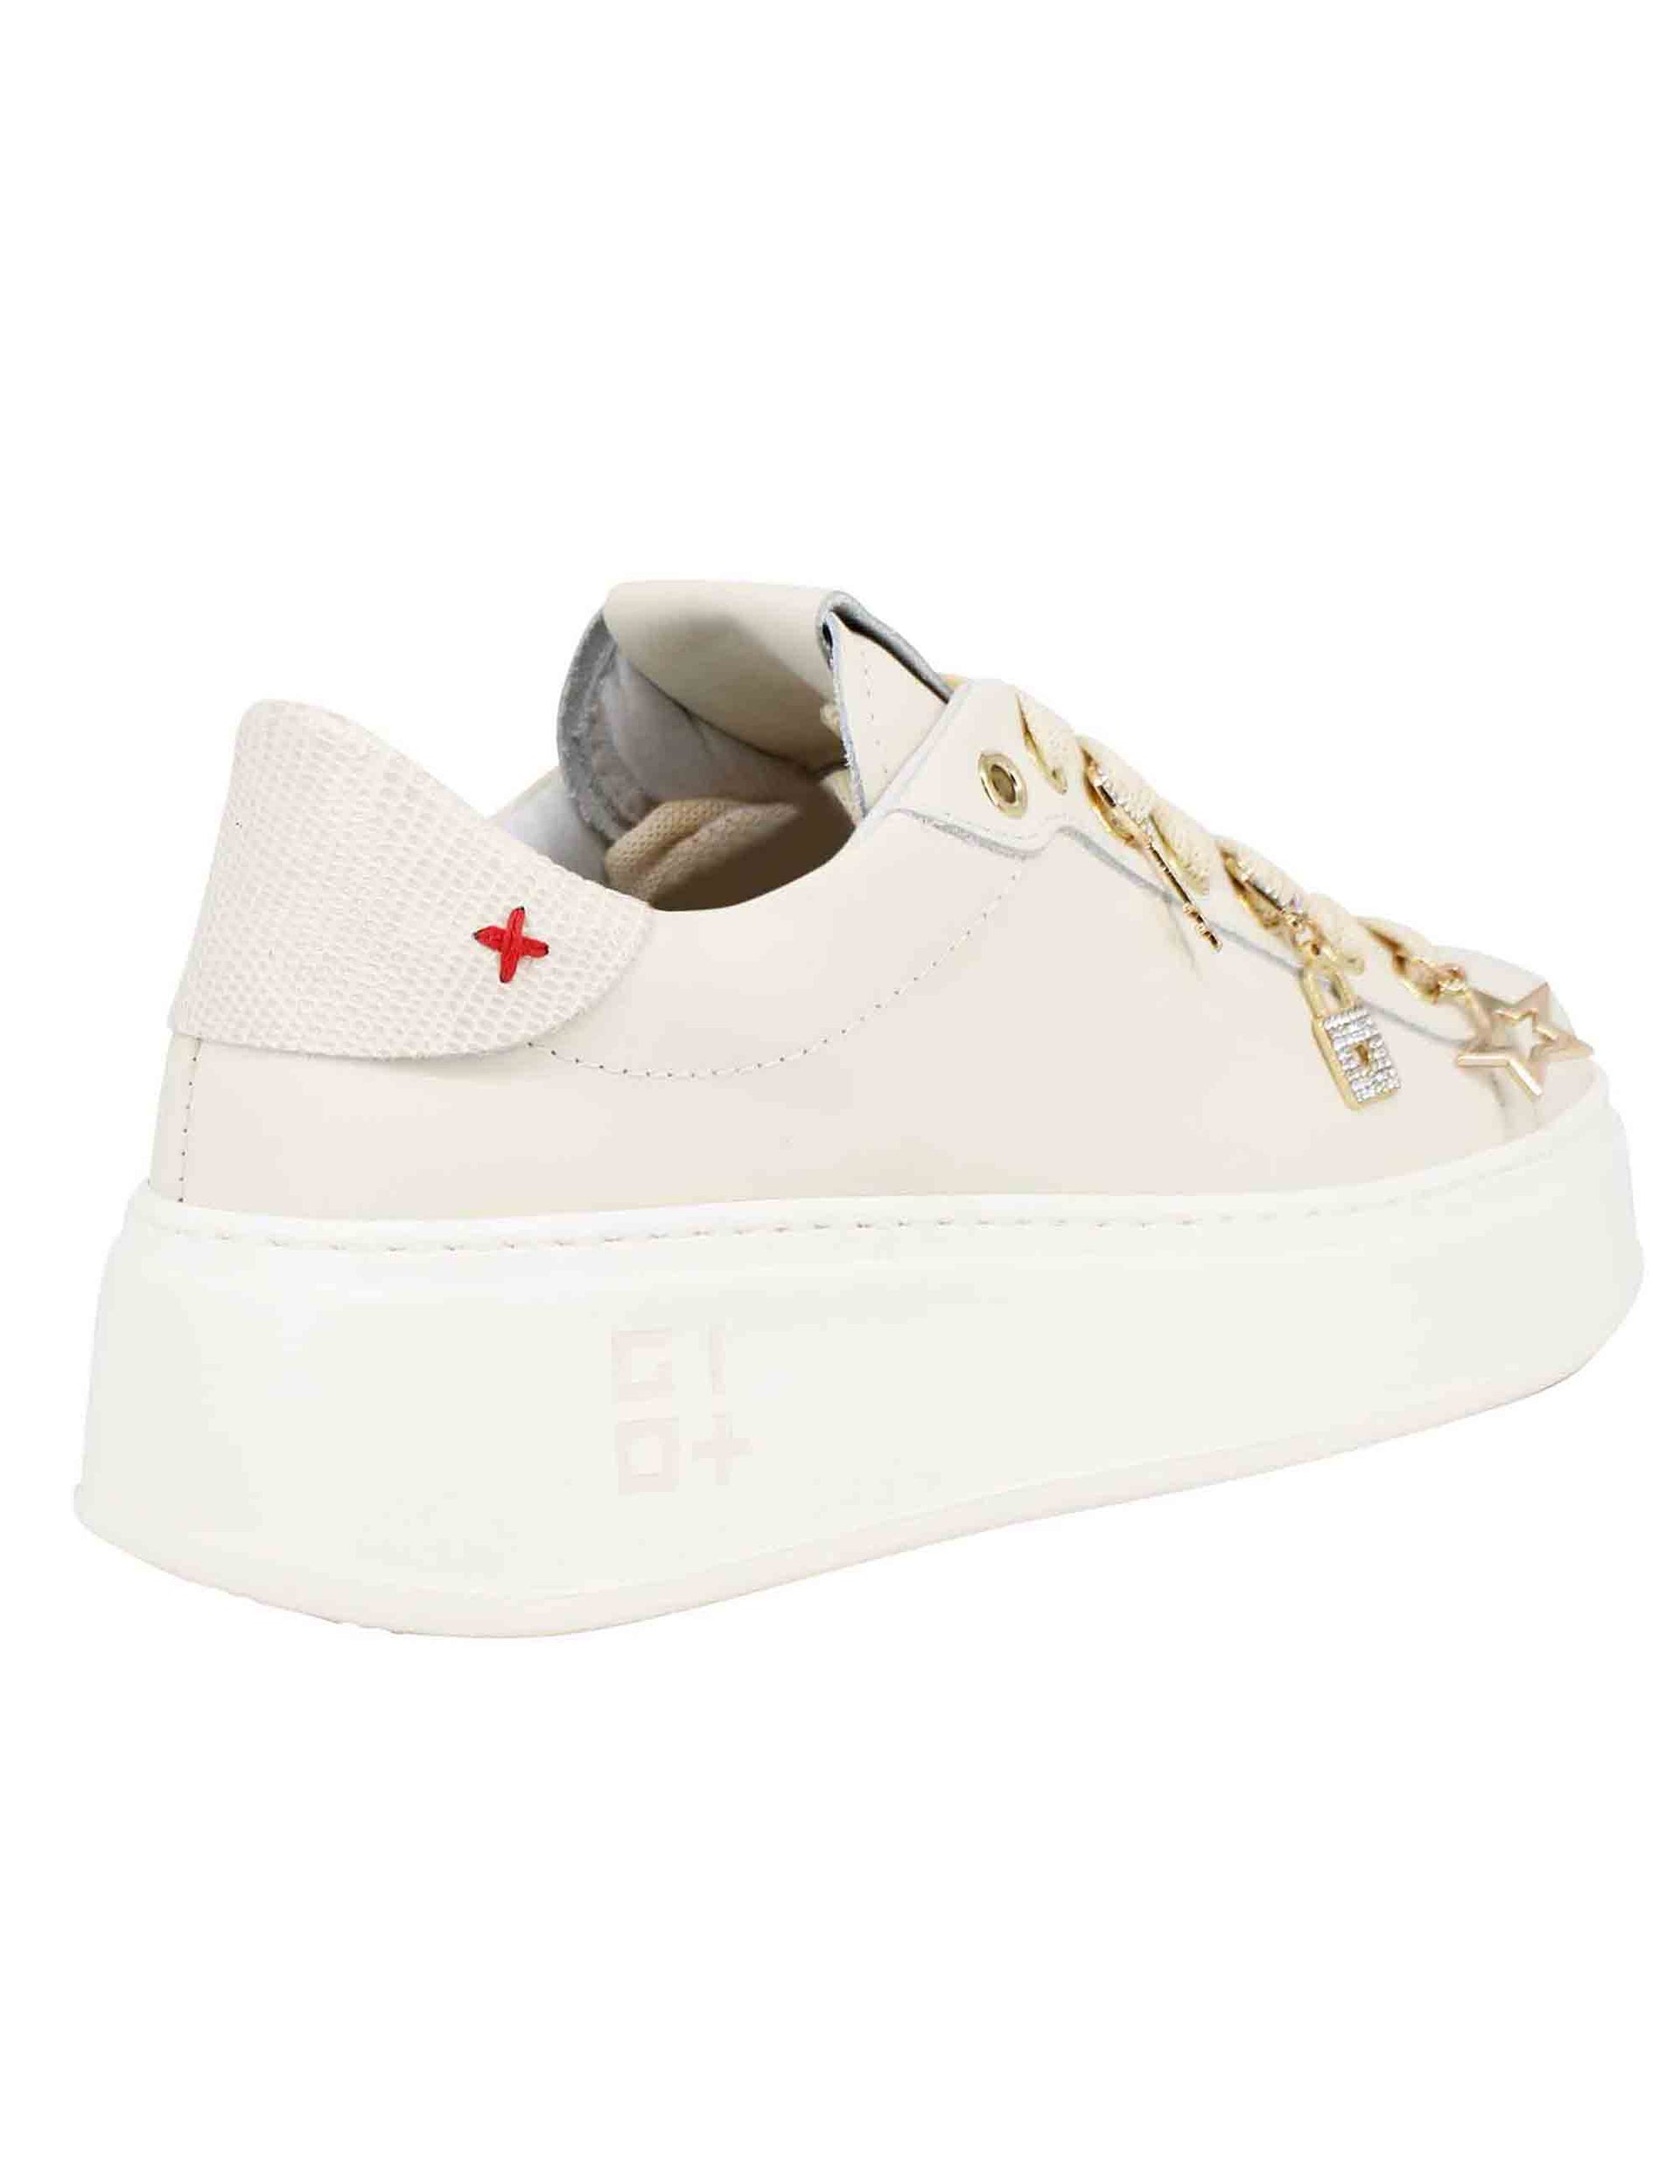 Women's beige leather sneakers with jewel charms and high sole